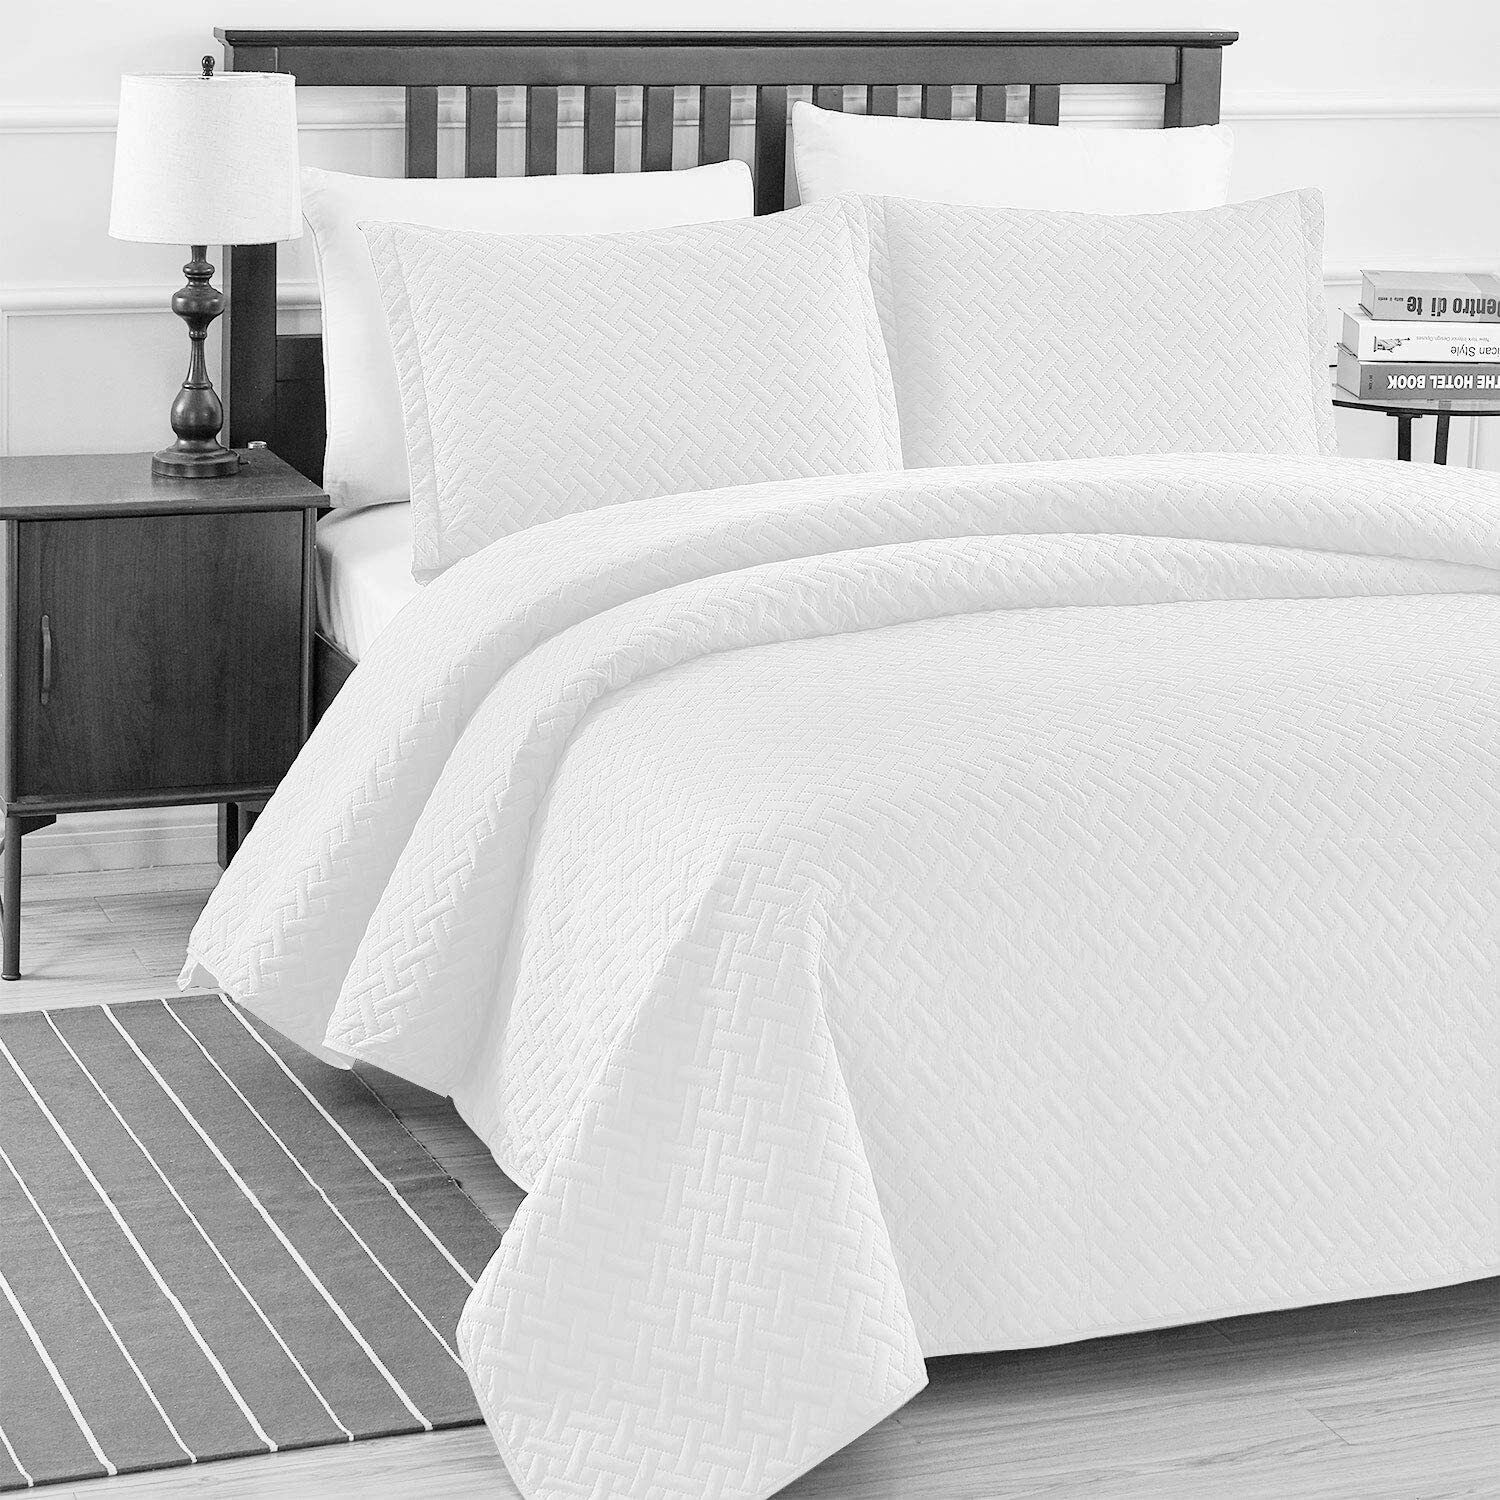 Primary image for Basic Choice 3-Piece Light Weight Oversize Quilted Bedspread Coverlet Set  White